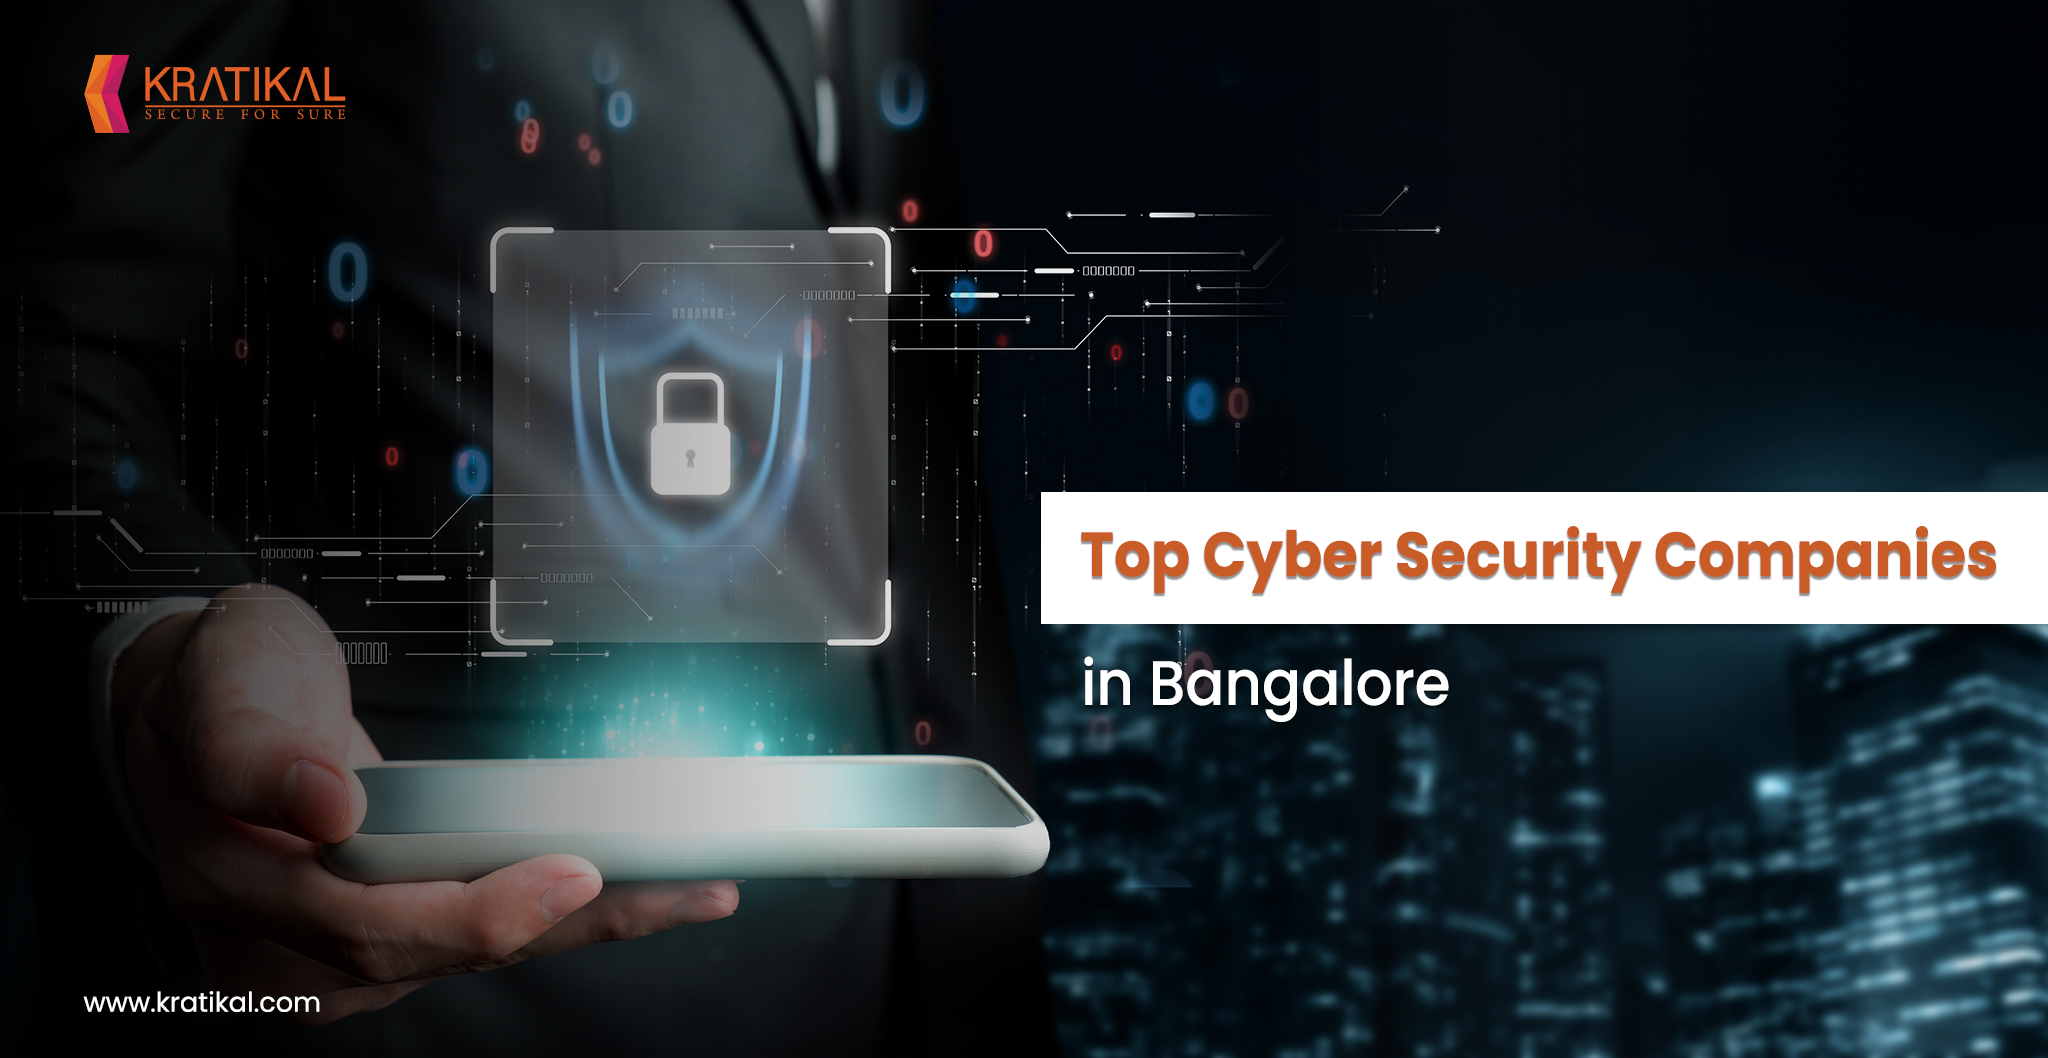 Top Cyber Security Companies in Bangalore